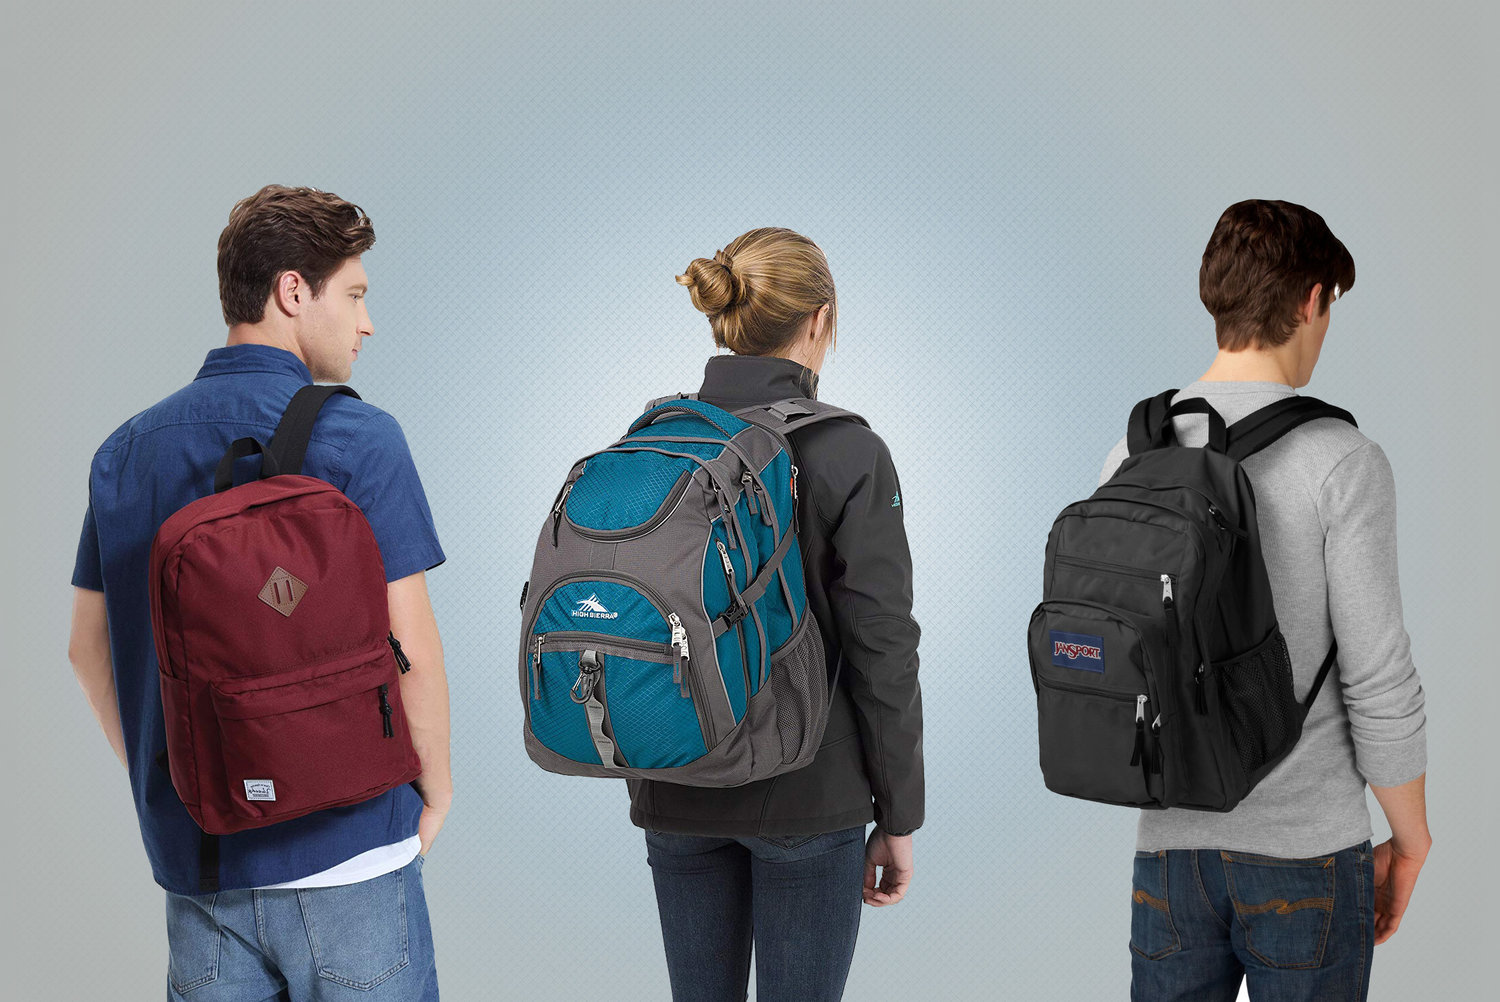 Why Is It Important To Carry First-Aid Oriented School Backpack?